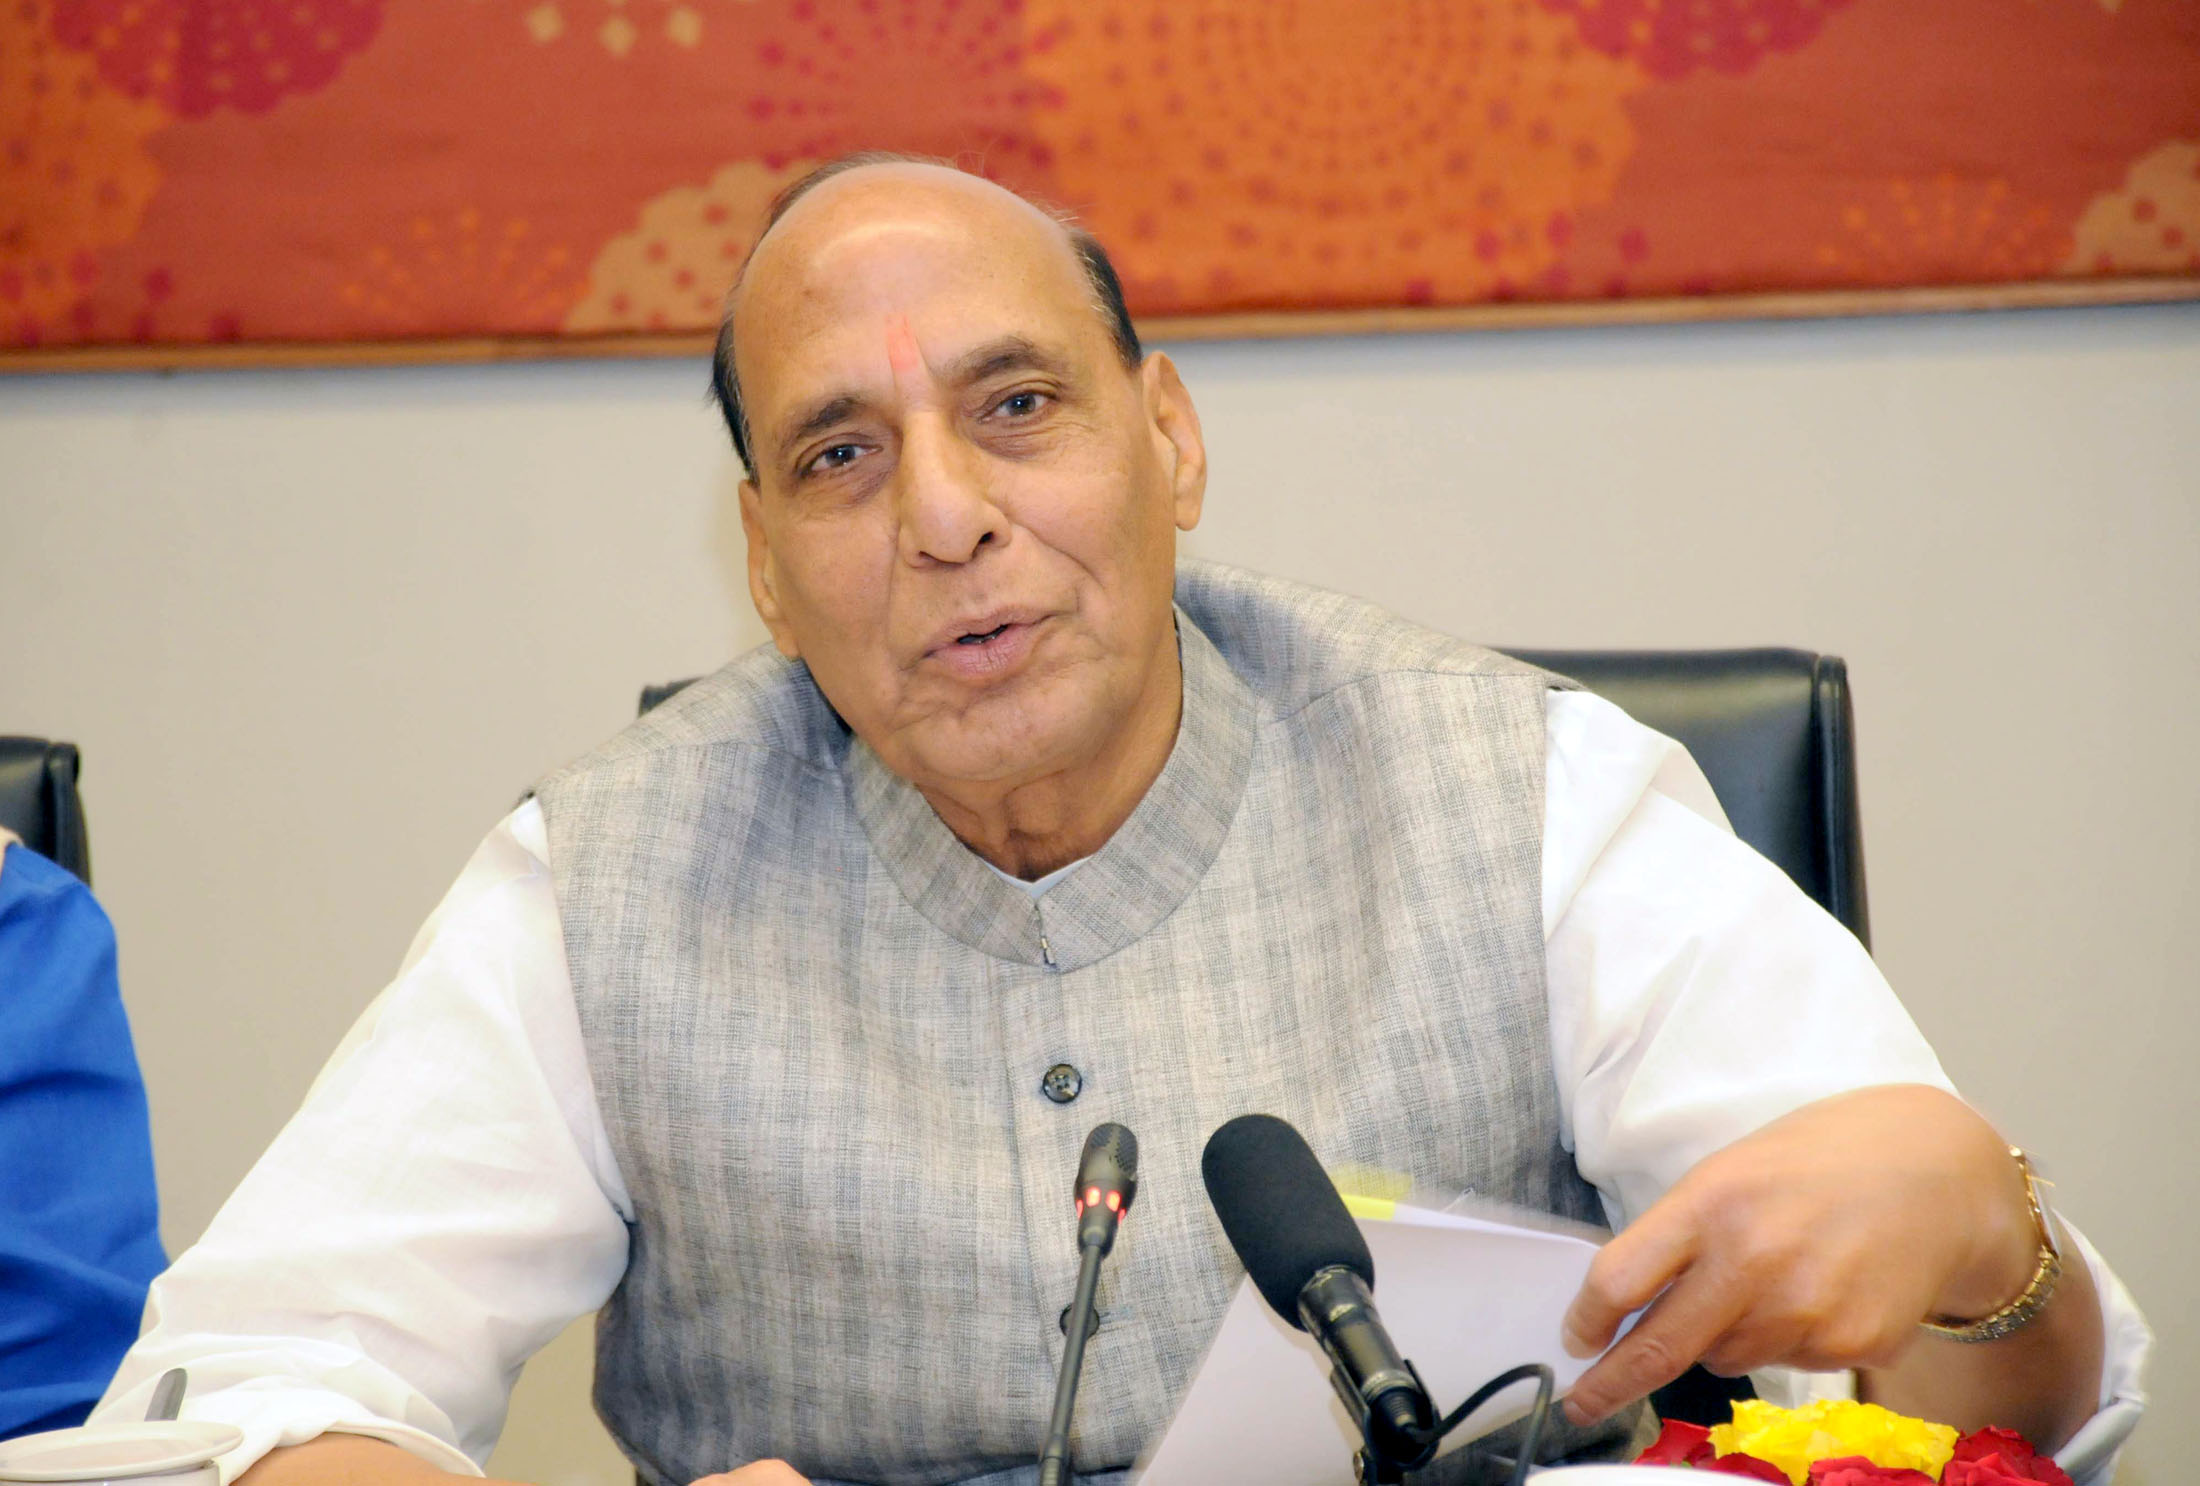 The Union Home Minister, Shri Rajnath Singh addressing the 23rd meeting of the Western Zonal Council, at Gandhinagar, Gujarat on April 26, 2018.